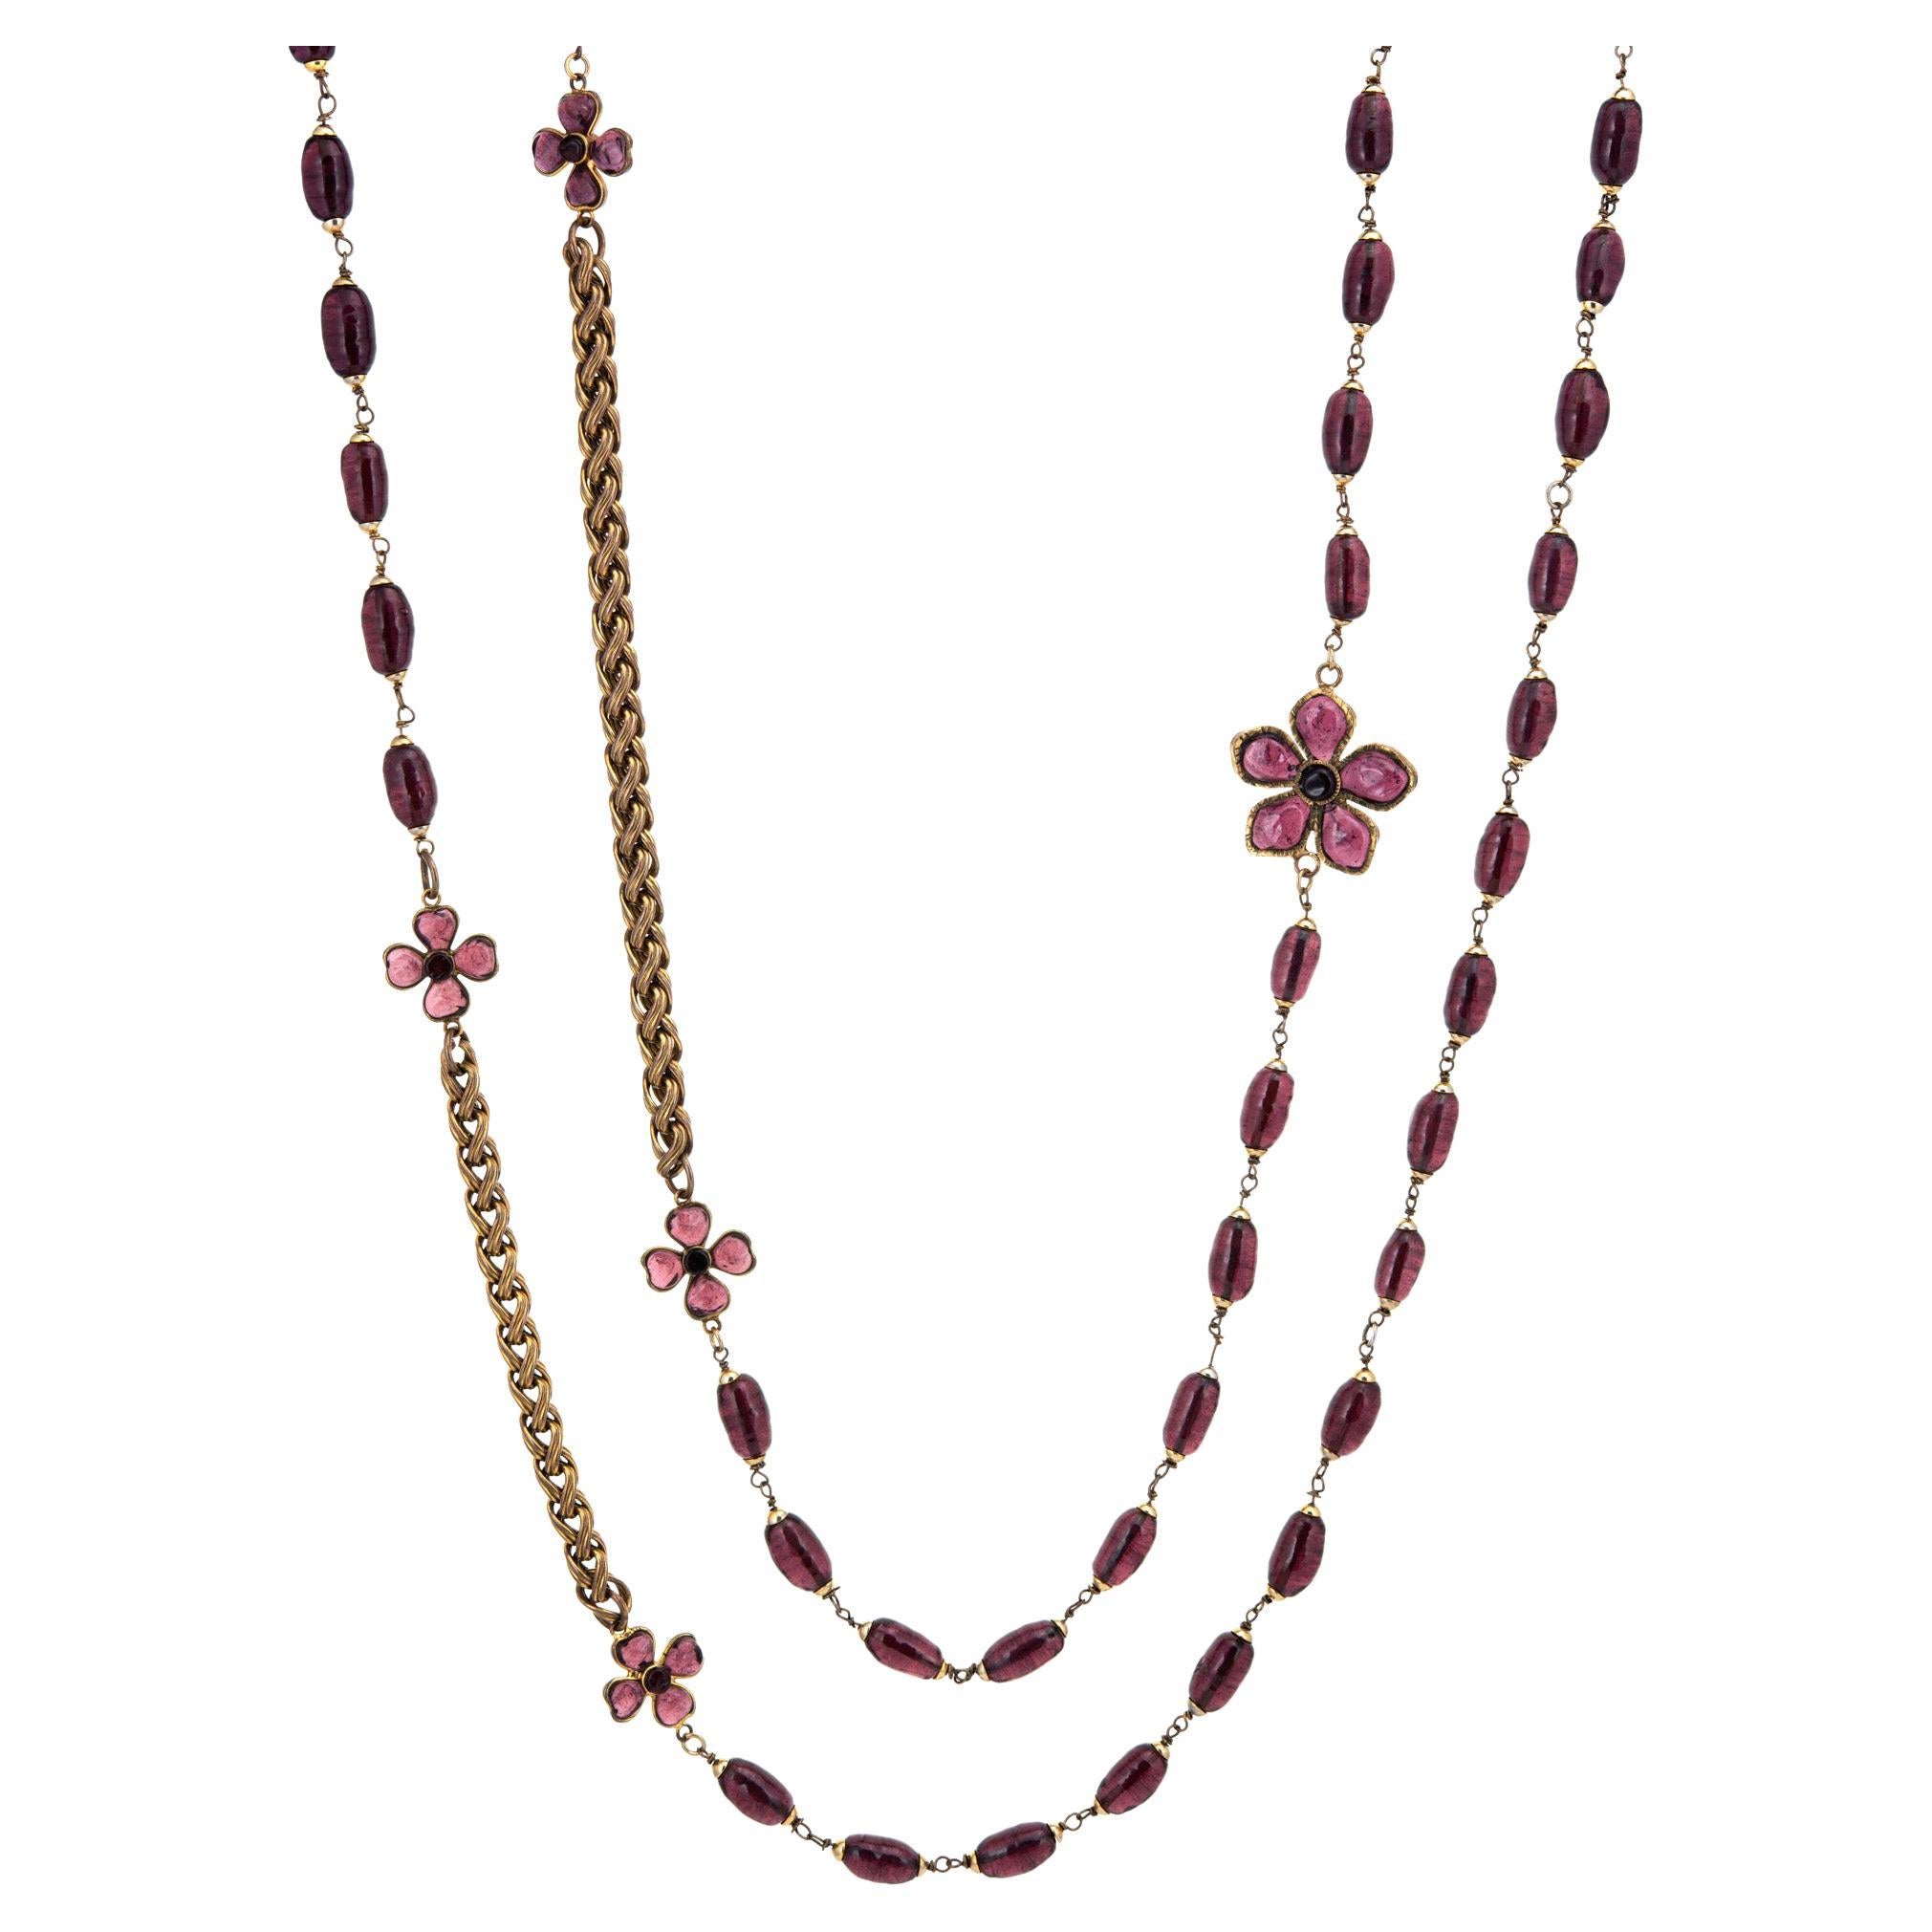 c1981 Ultra Long 105" Vintage Chanel Flower Necklace Purple Glass Beads 